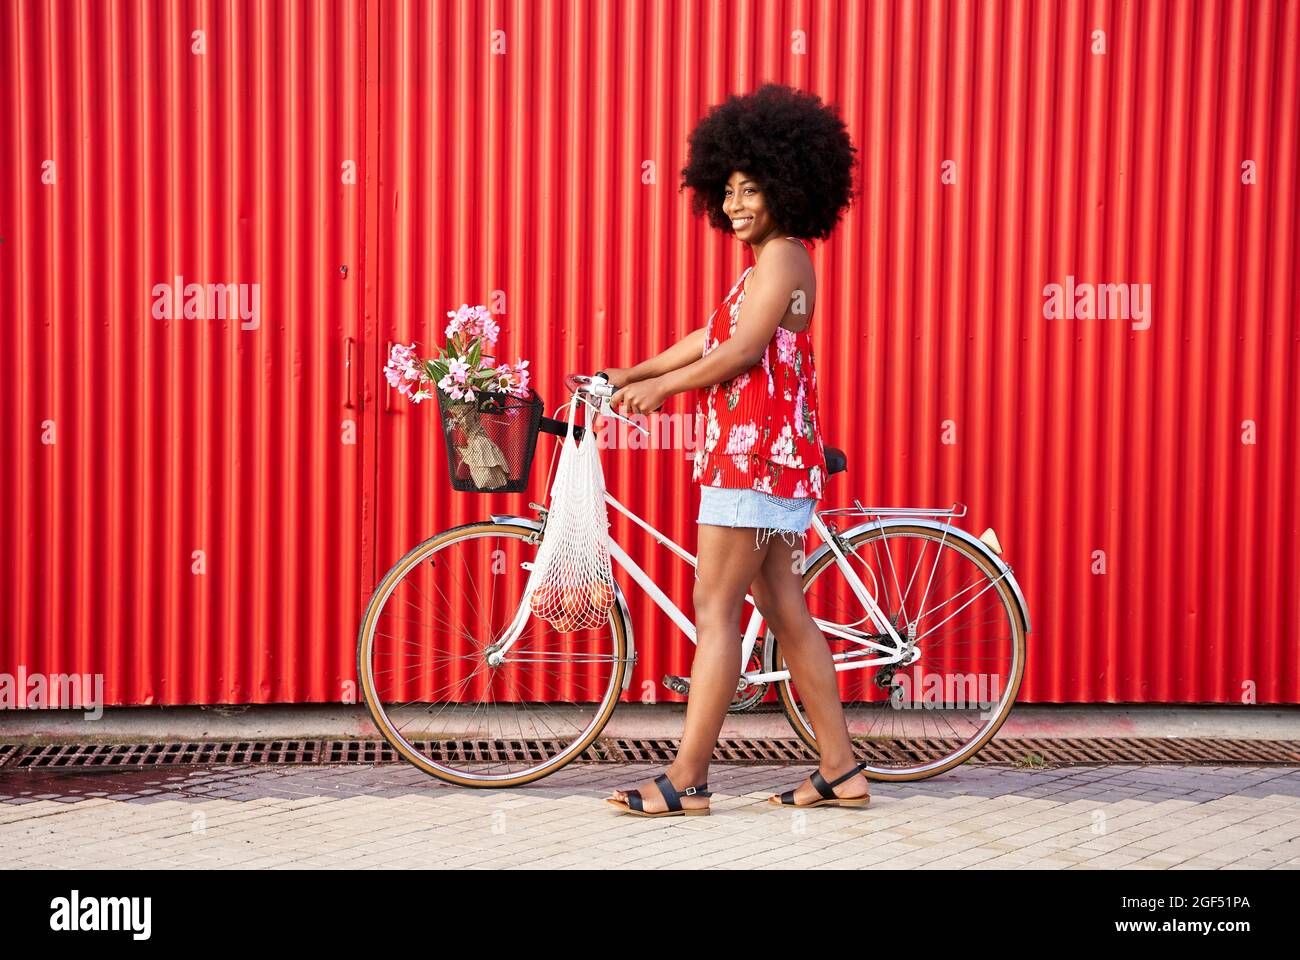 Smiling woman walking with bicycle by red corrugated wall Stock Photo